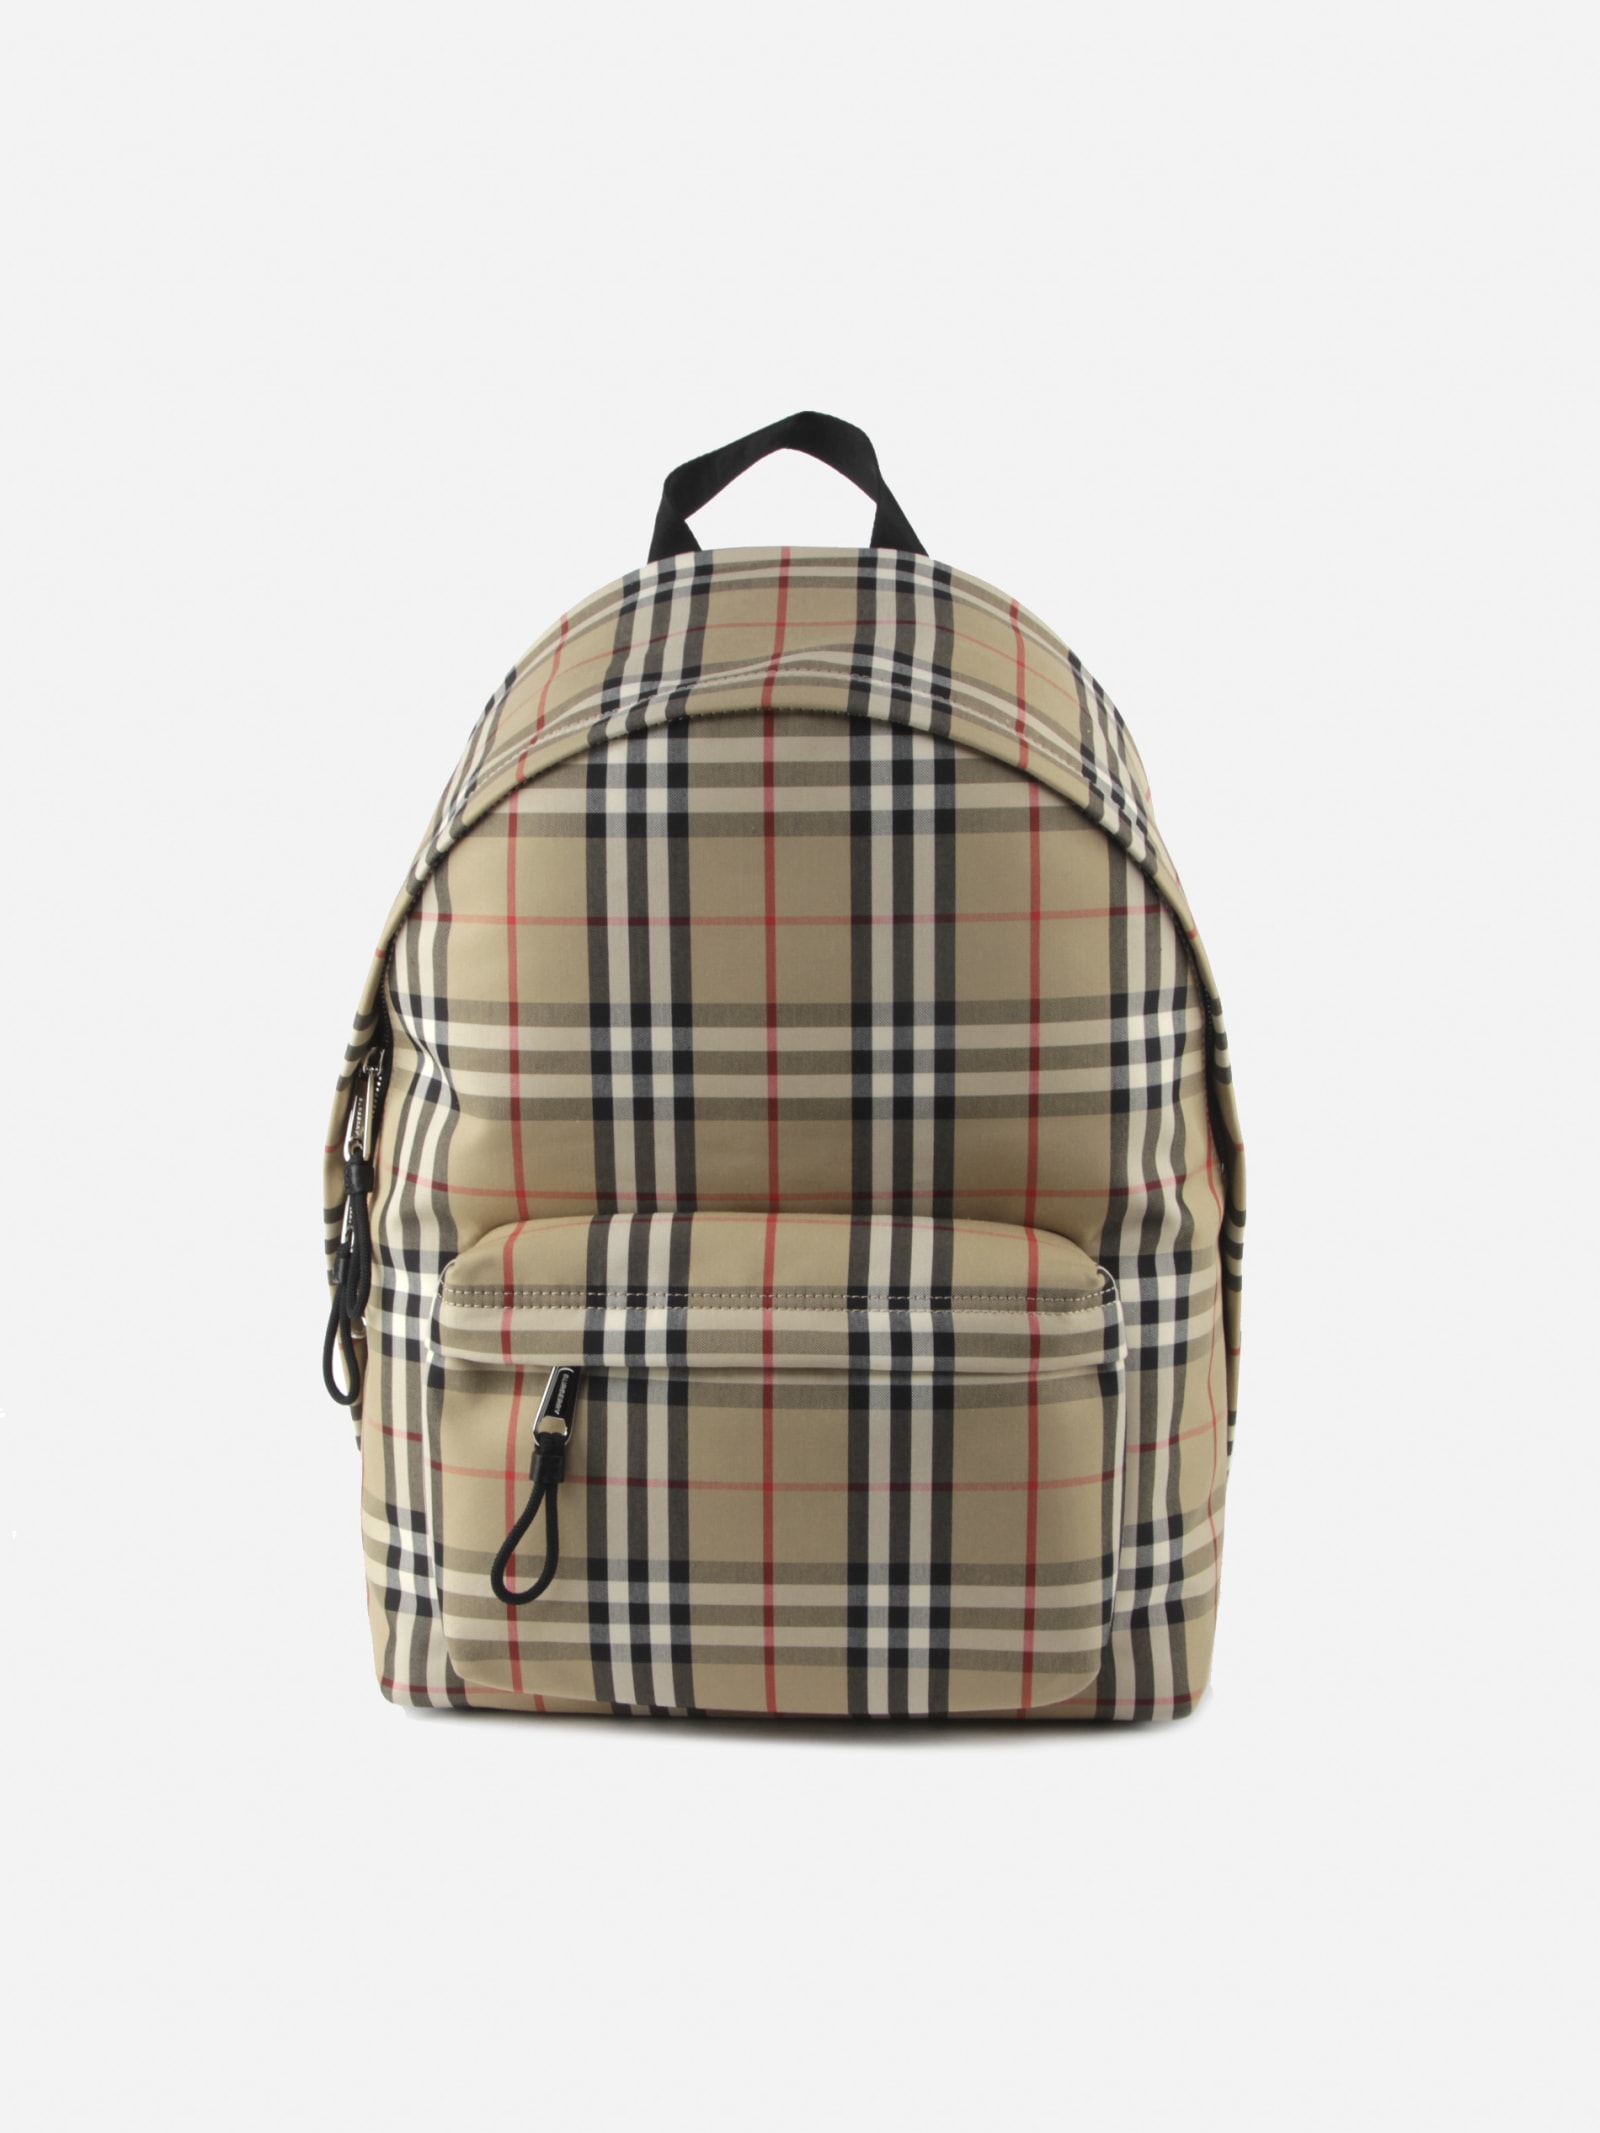 Burberry Vintage Check Tartan Backpack With Leather Trim